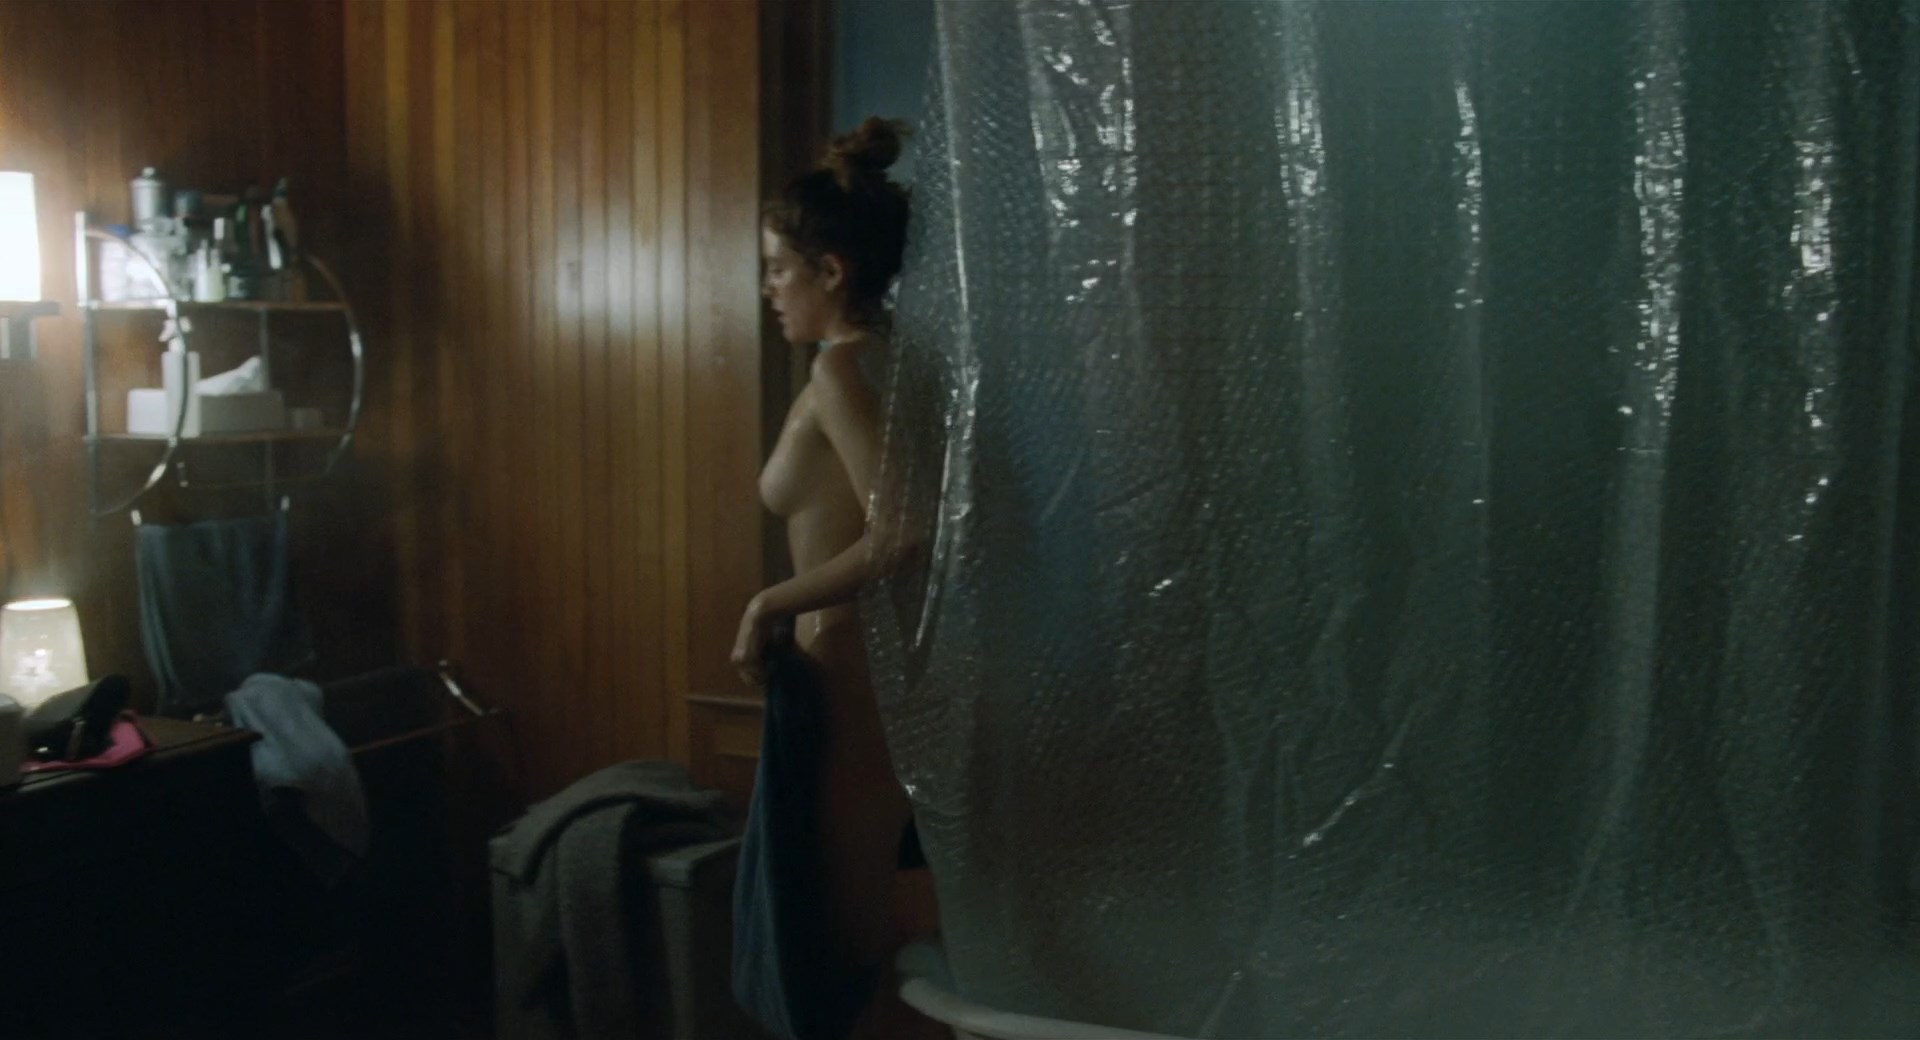 Riley Keough comes out from the shower, she shows her tits.